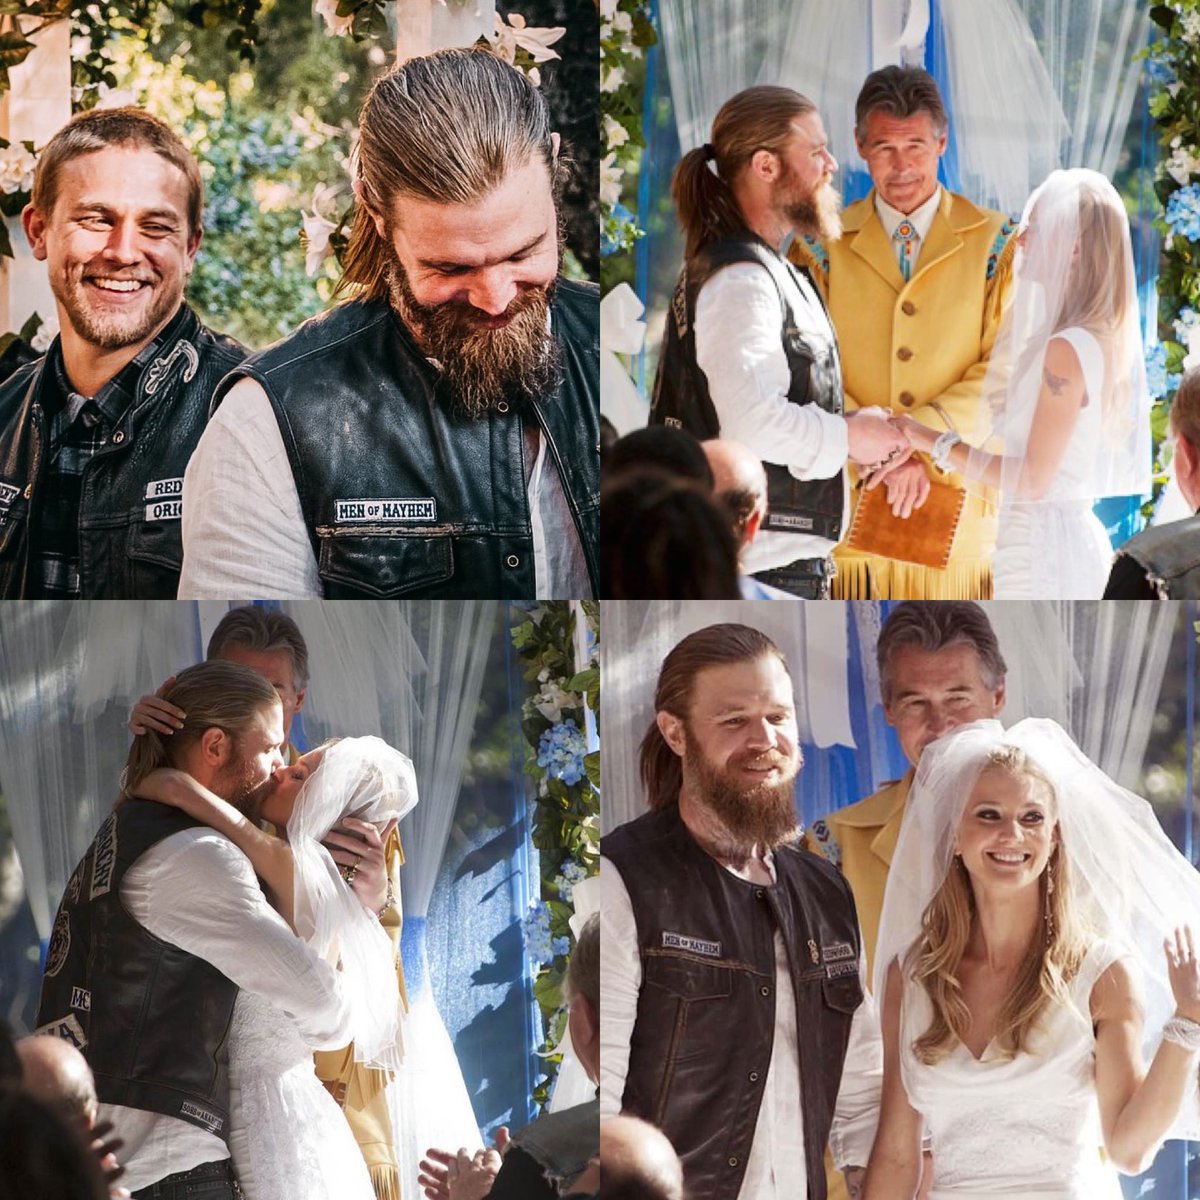 Why not smile on Wednesday? Opie and Lyla in the beginning. We know nothing lasts forever in Charming,CA.#CharlieHunnam#SonsofAnarchy
⁦@RamboDonkeyKong⁩#JaxTeller#soa#tilldeathdouspart